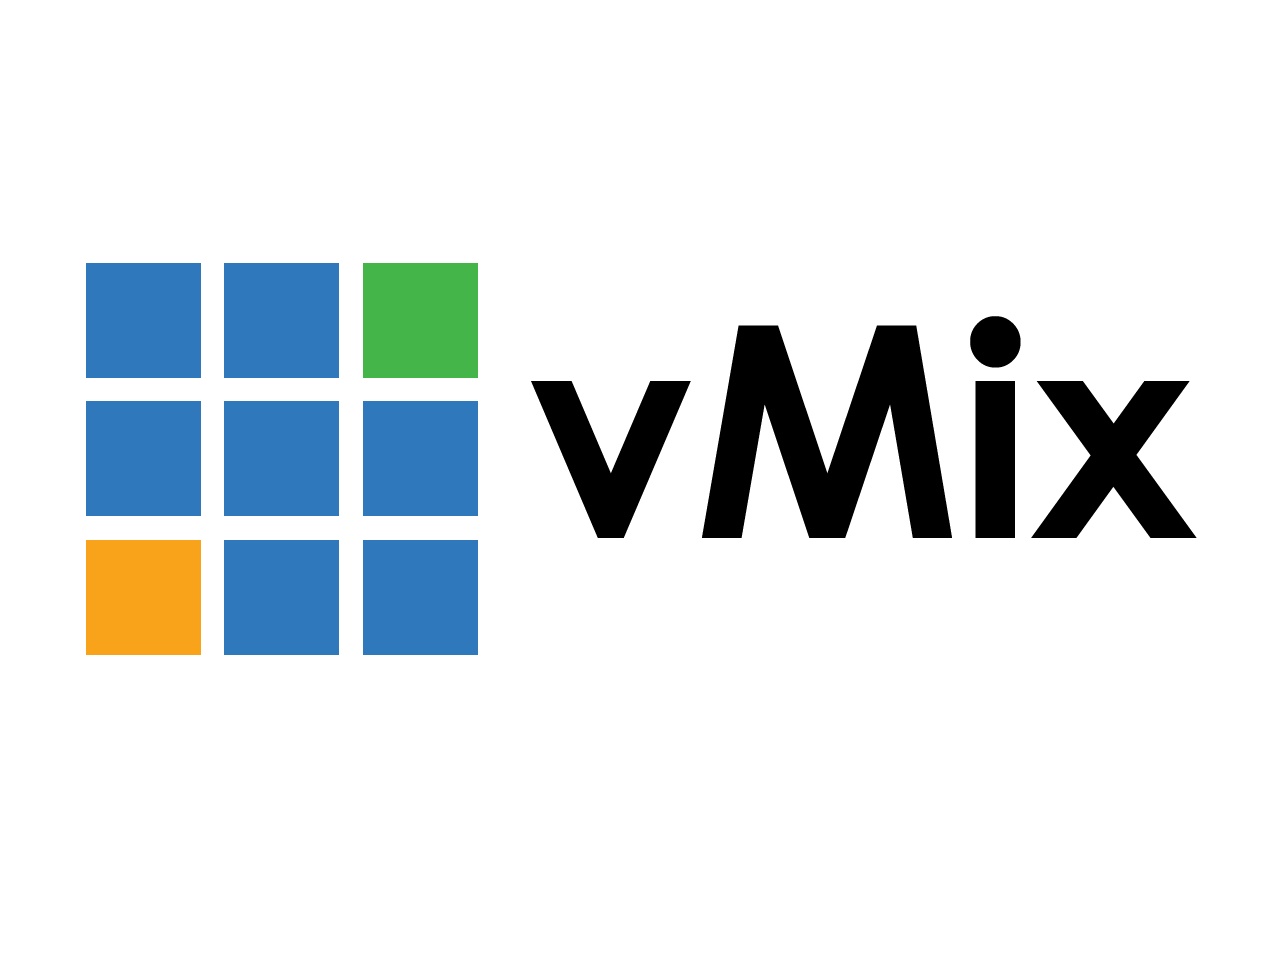 Basic HD Live Production/Streaming Software License by vMix